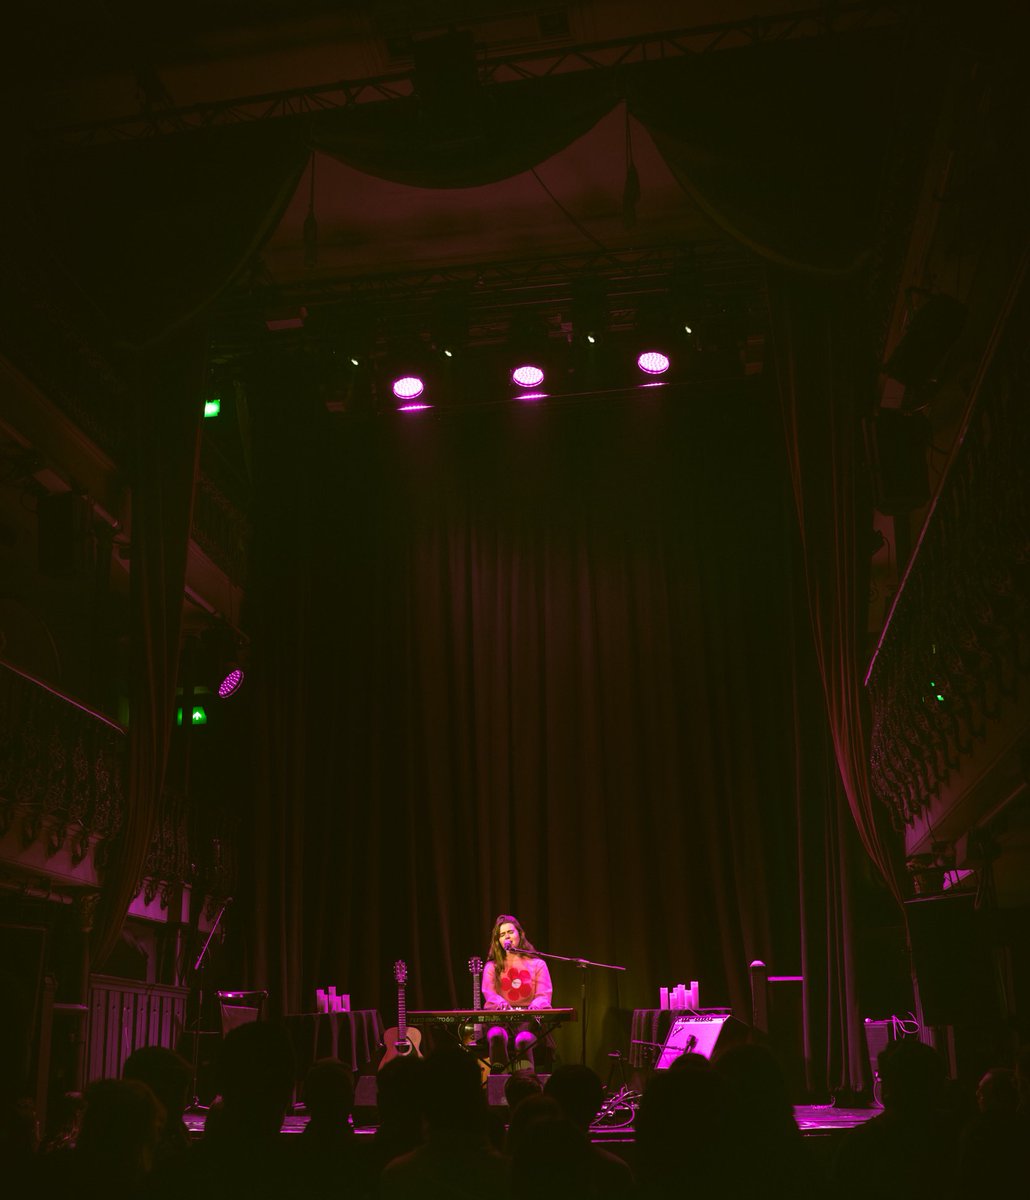 a beautiful time at hoxton hall last week. coming to manchester this Saturday for @fairplayfest ❤️ I’ll be playing at the peer hat, 6.45pm